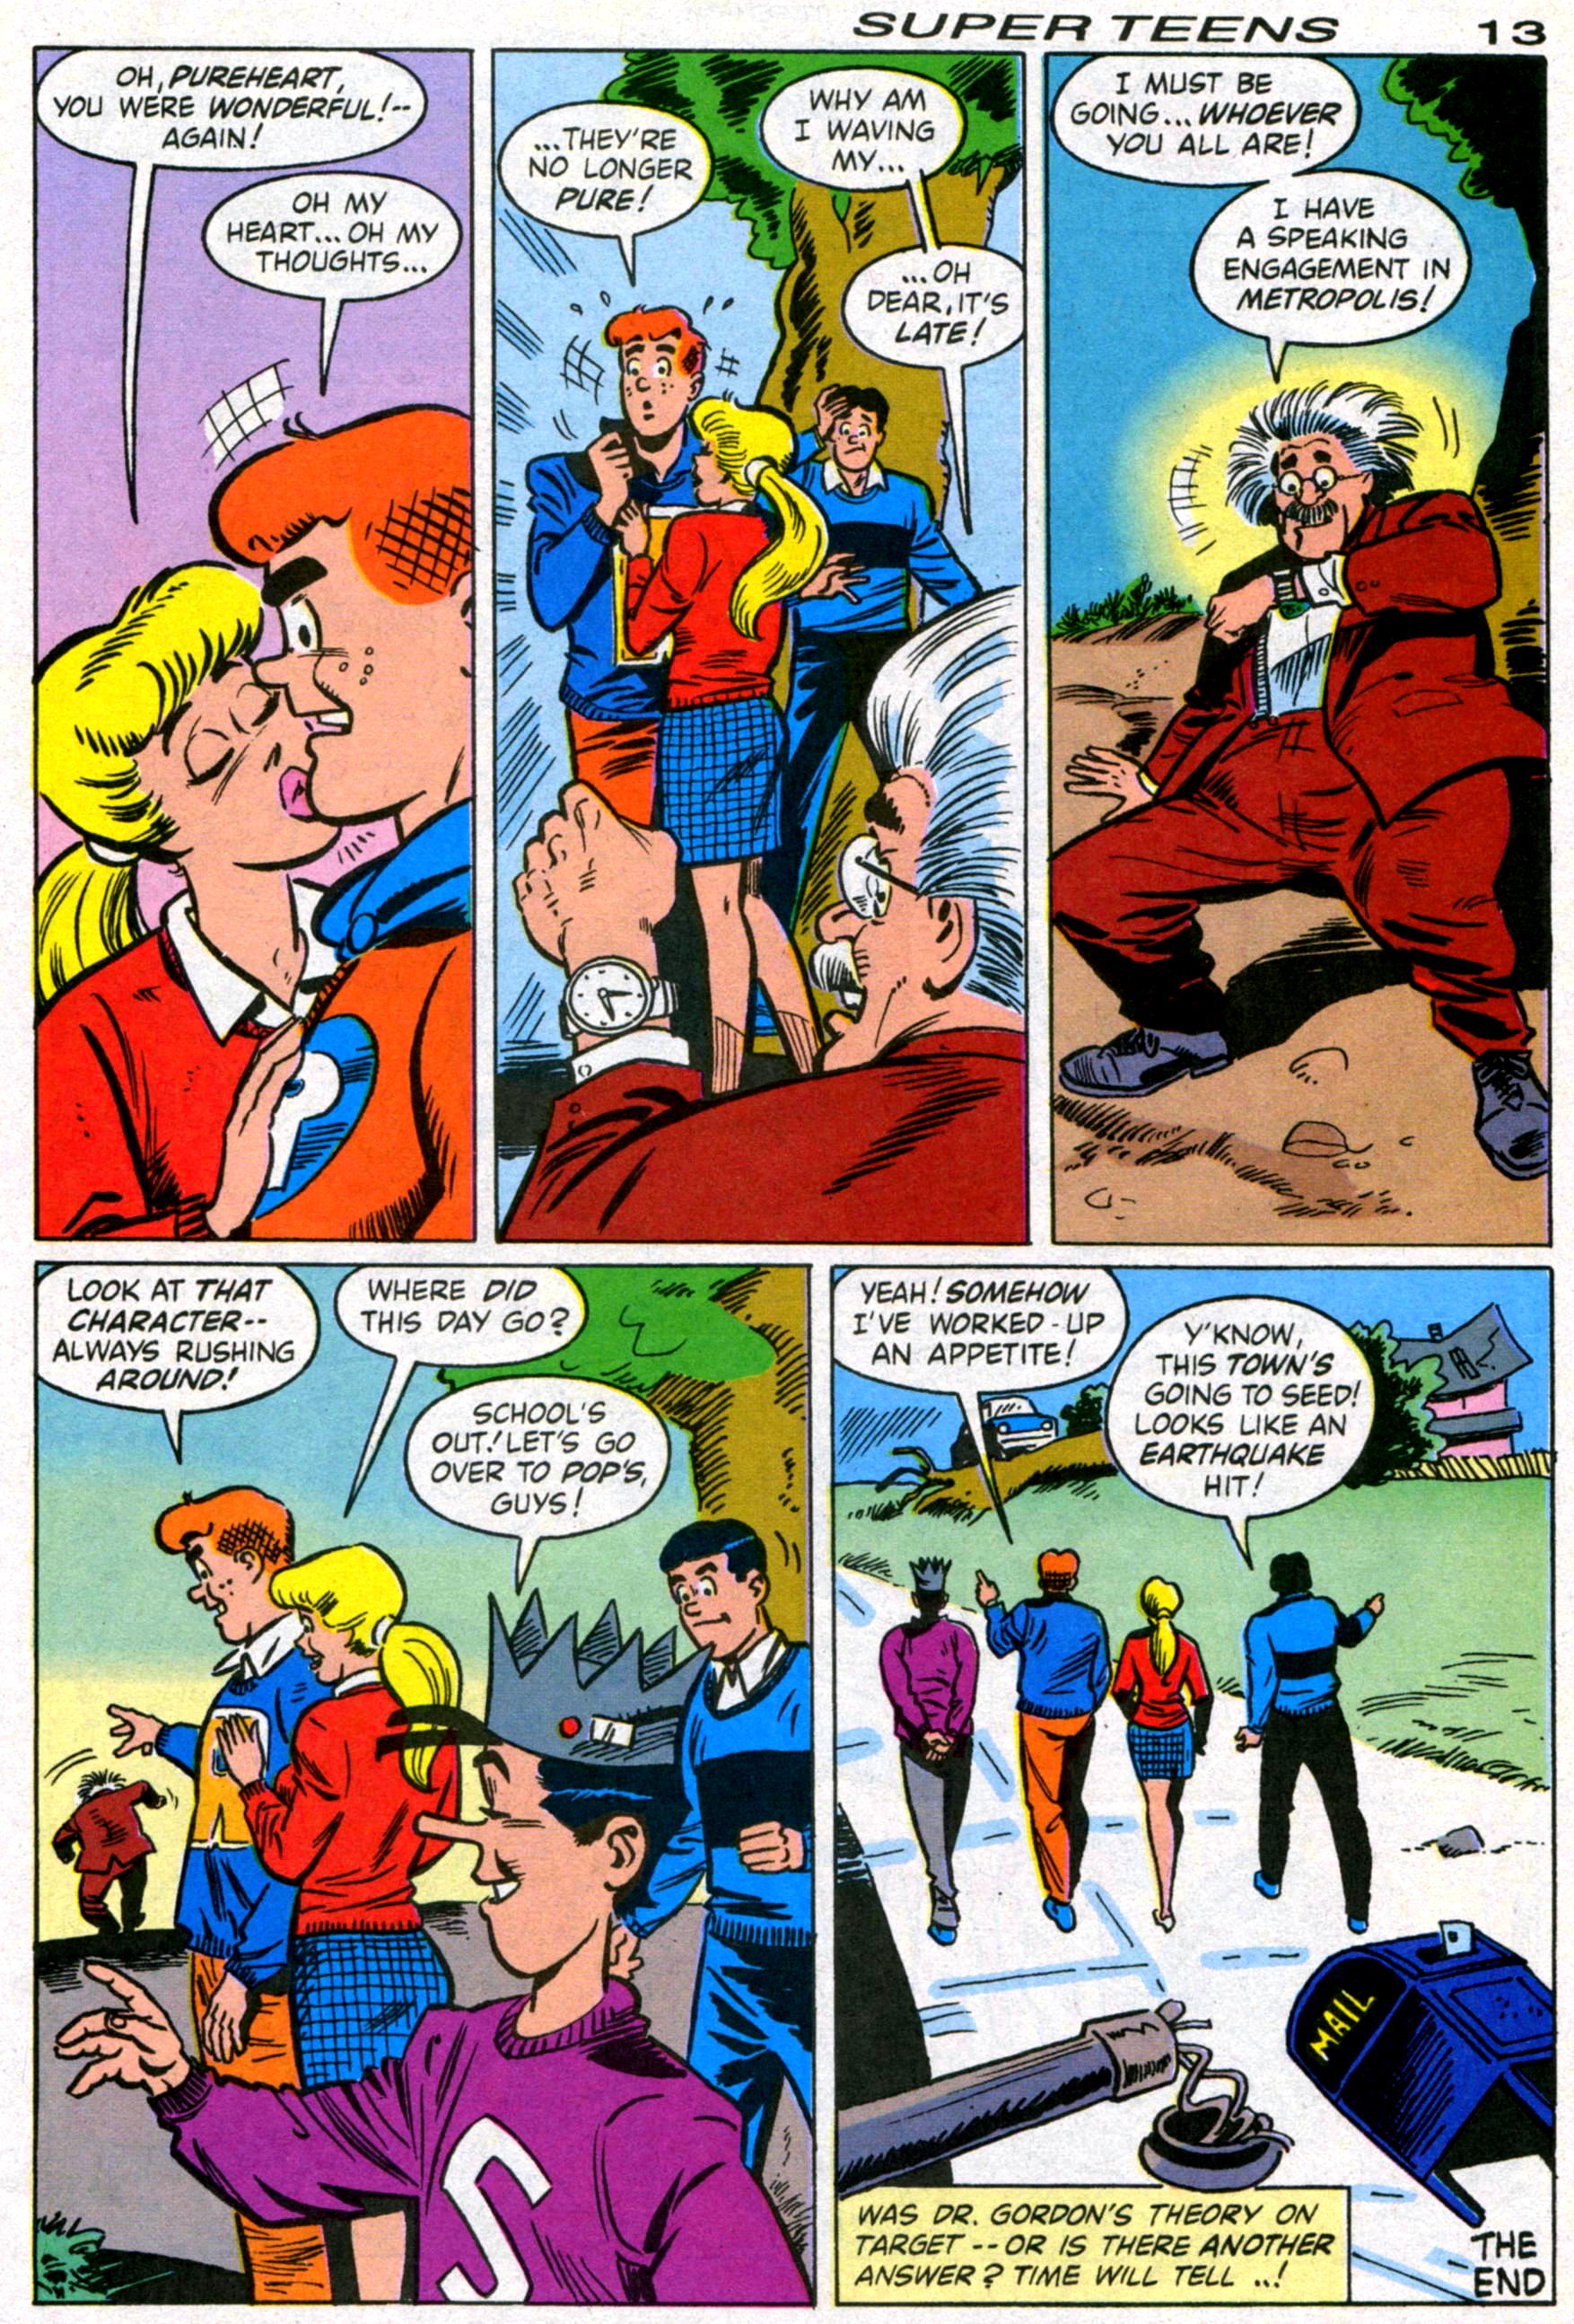 Read online Archie's Super Teens comic -  Issue #1 - 15